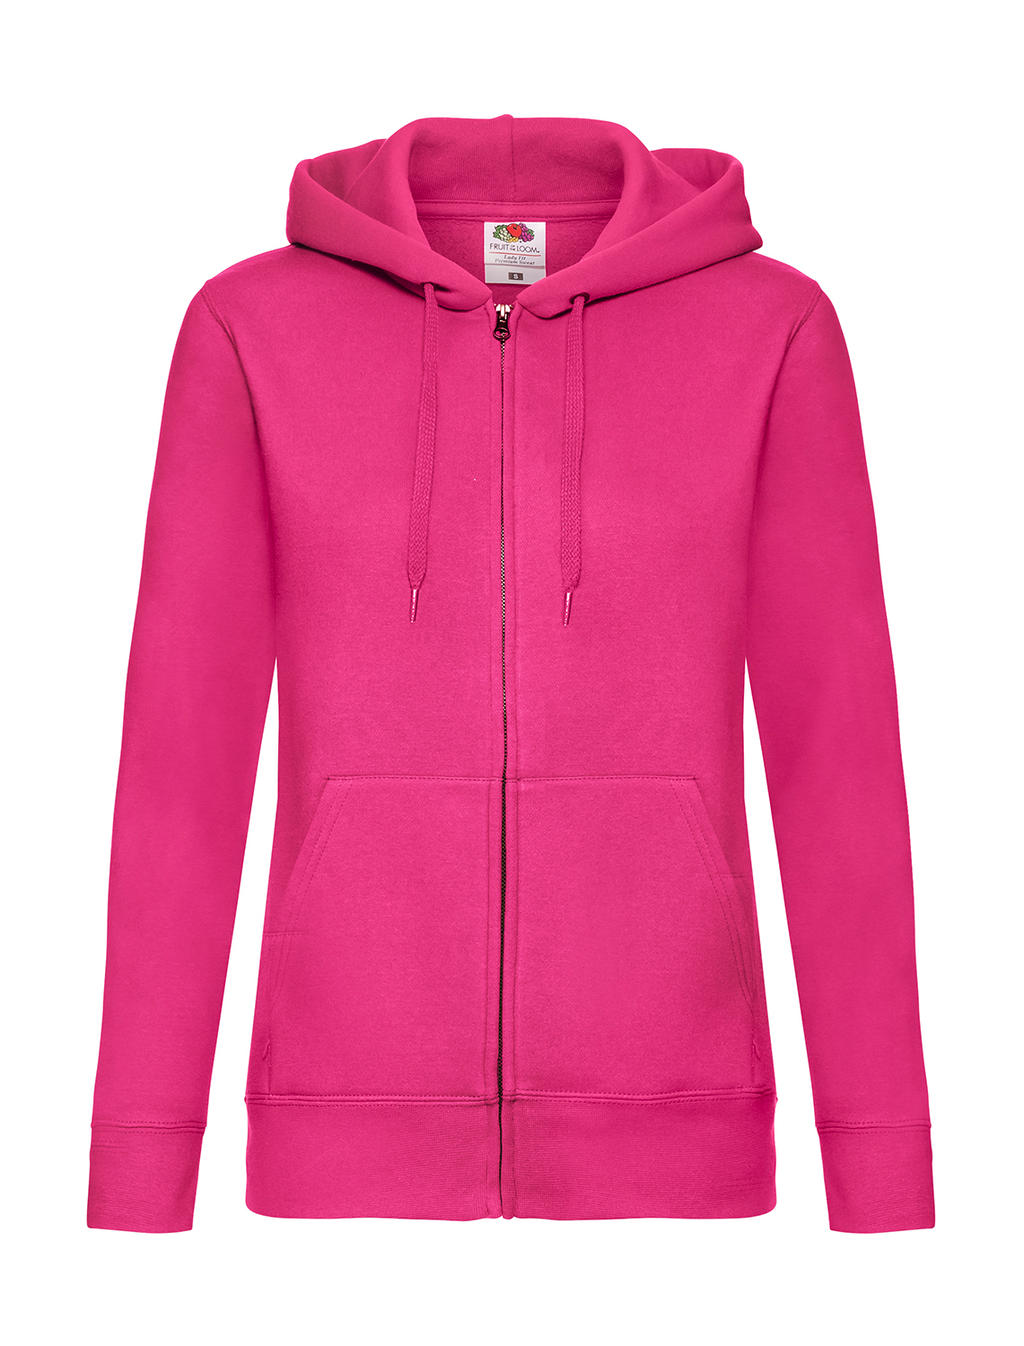  Premium Hooded Sweat Jacket Lady-Fit in Farbe Fuchsia